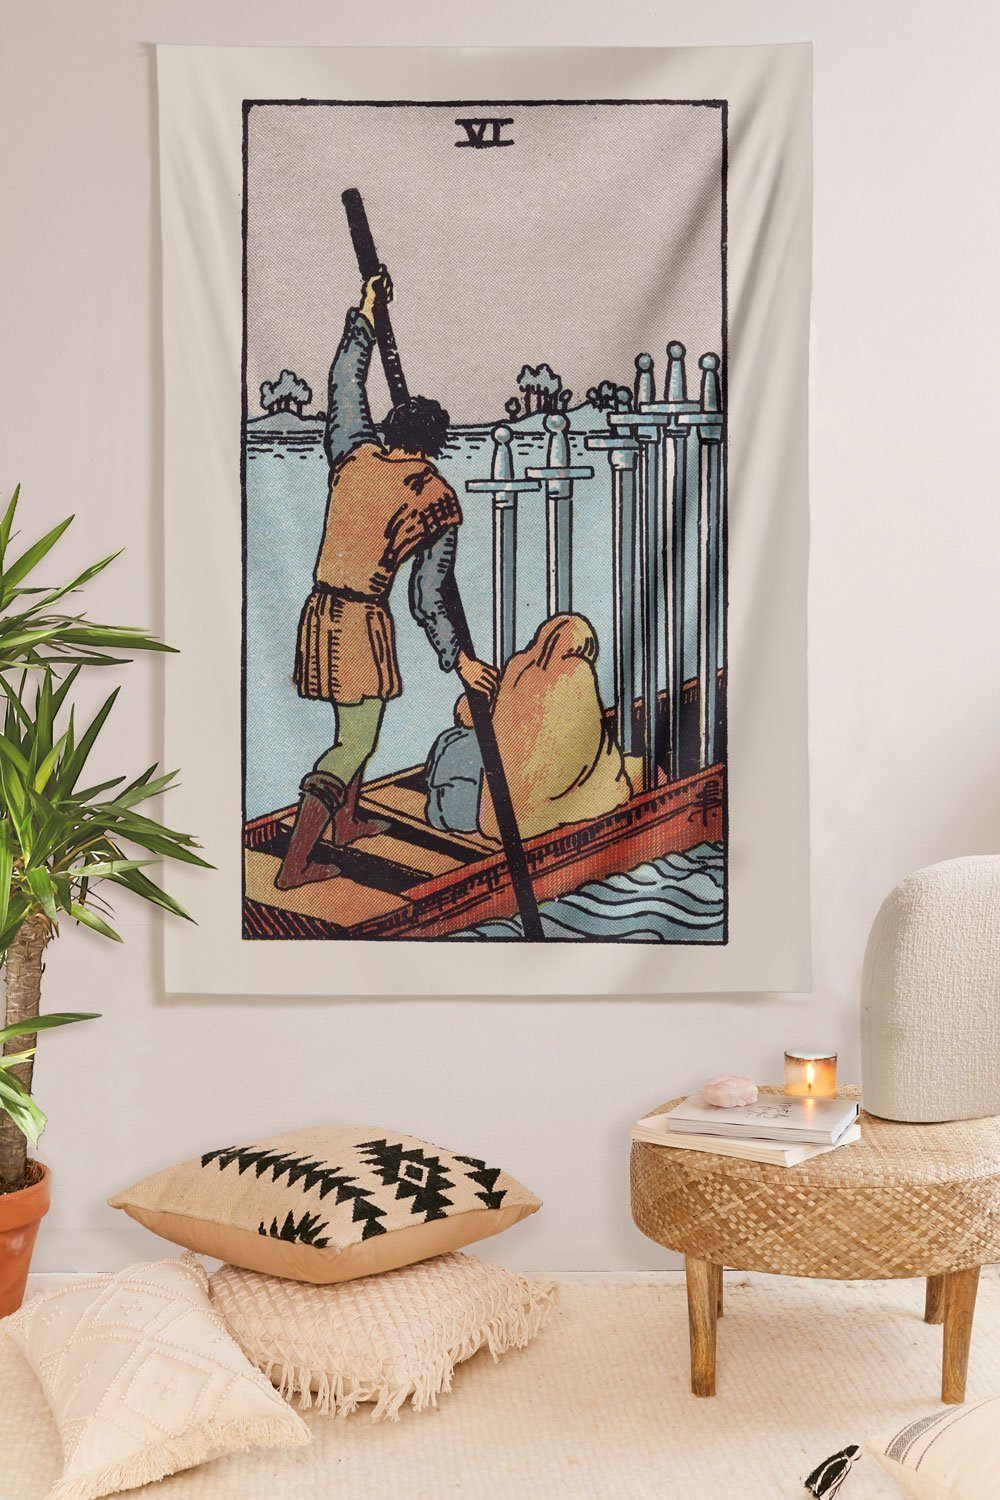 6 of Swords Tapestry tapestry NirvanaThreads 